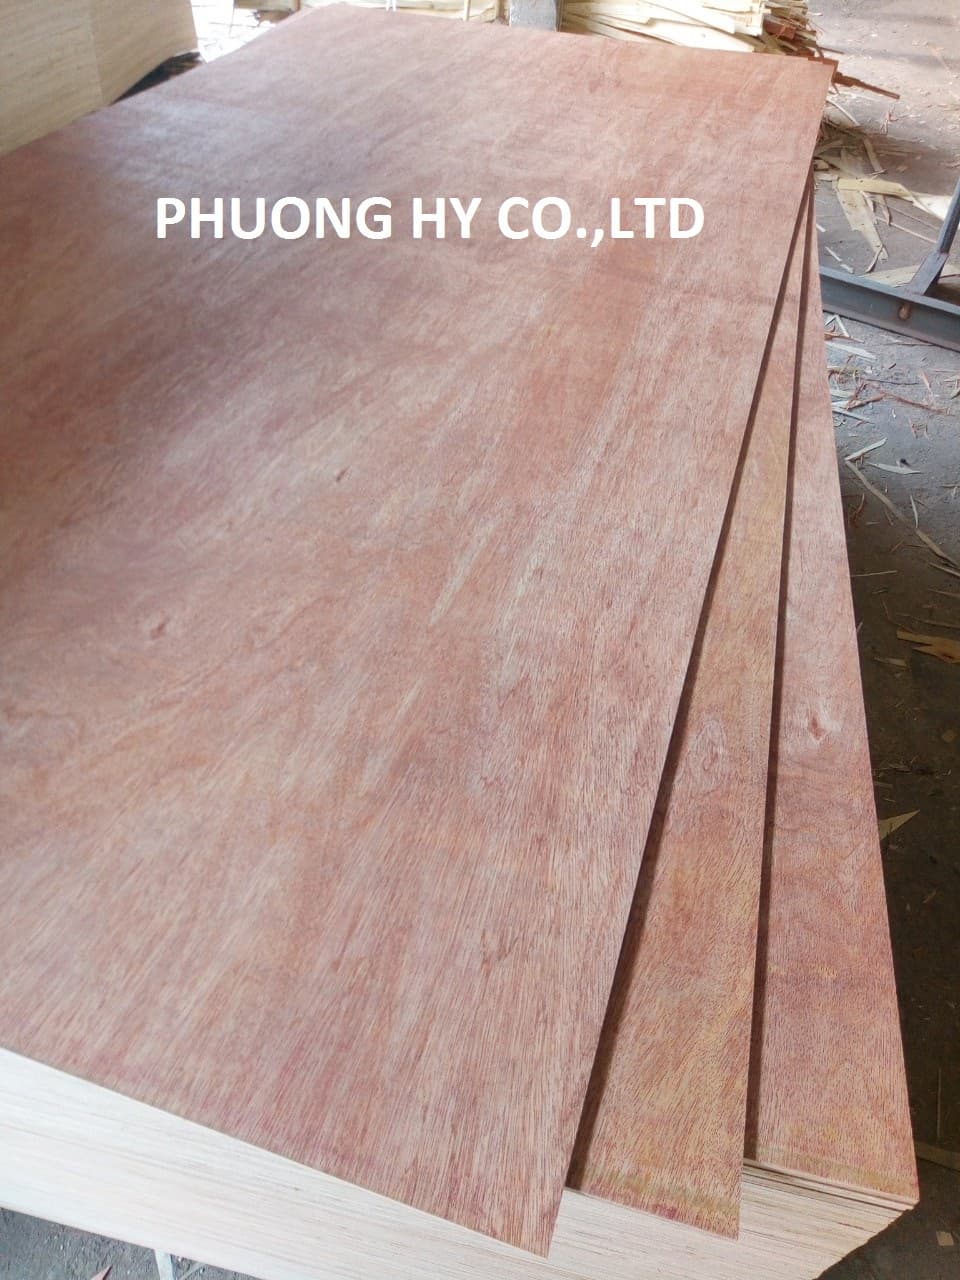 Plywood grade BC glue AB thickness 7mm export only to Korea